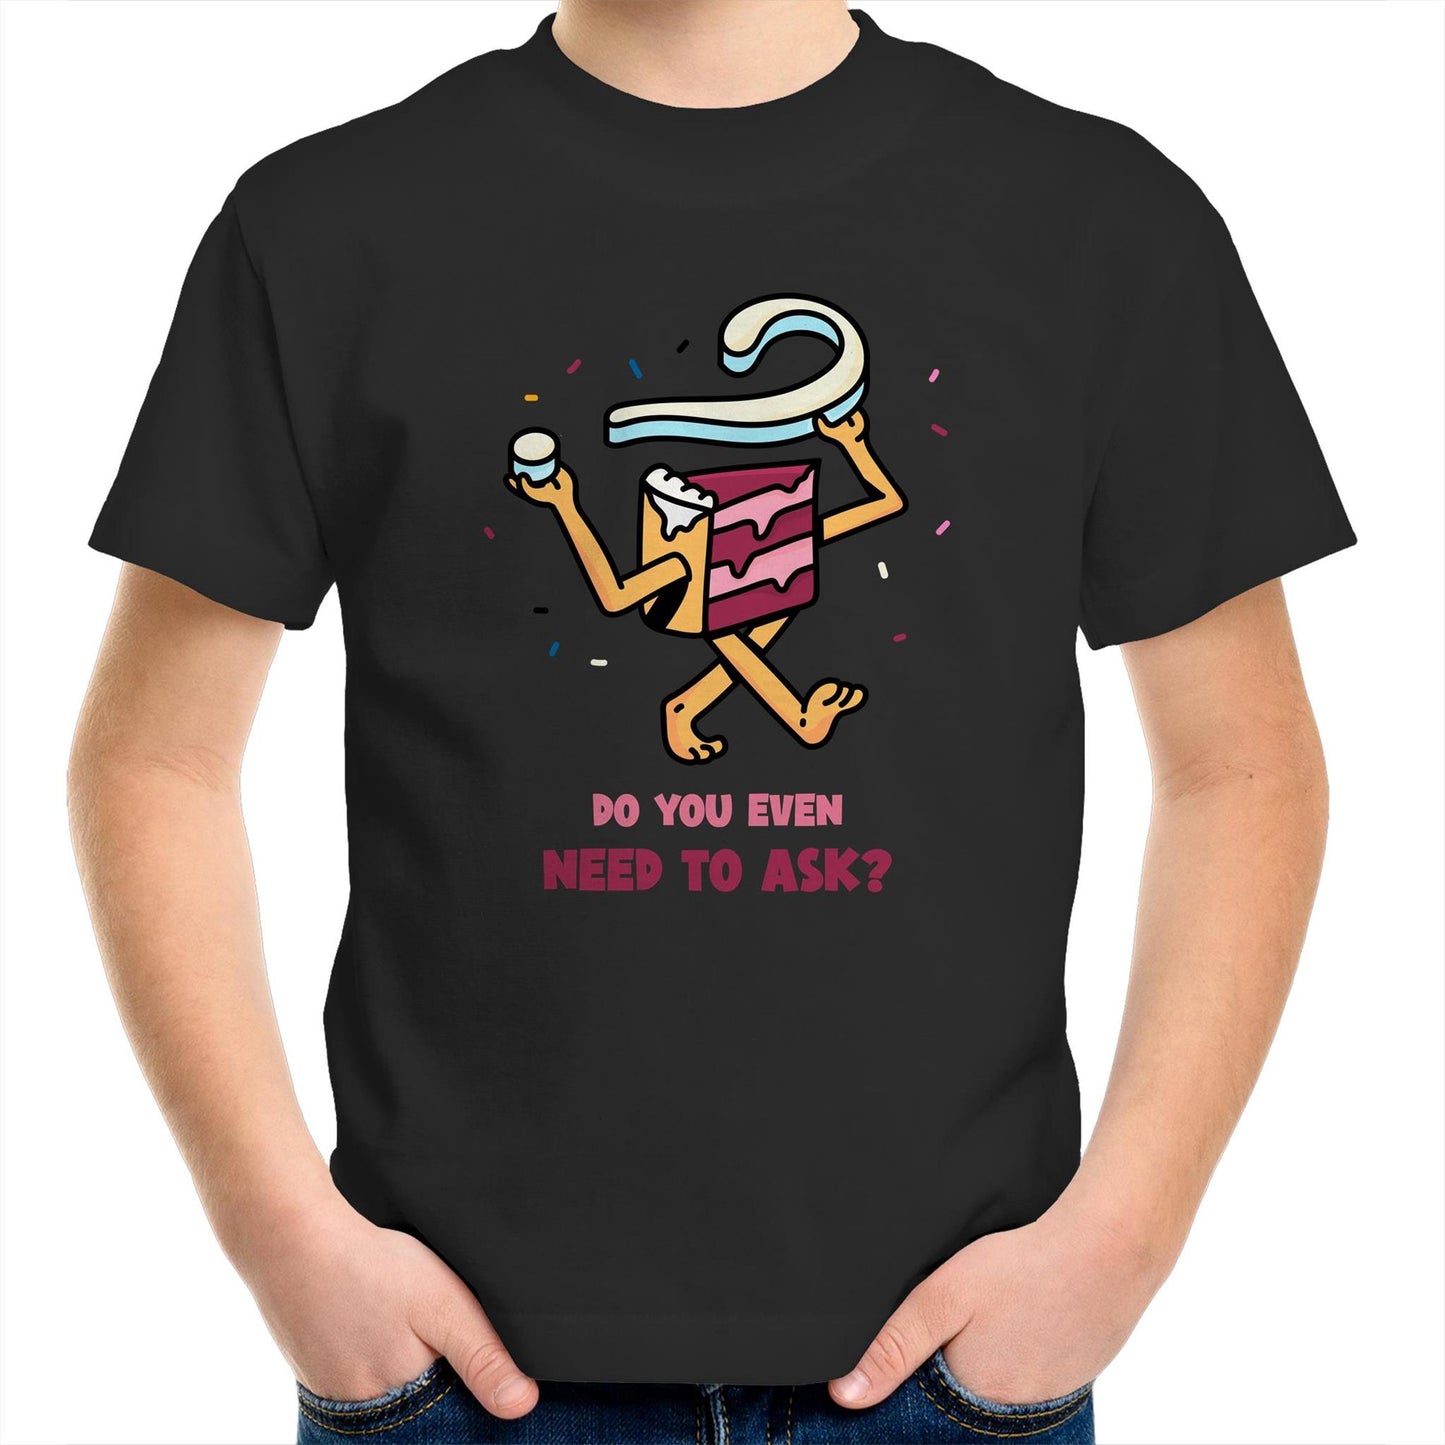 Cake, Do You Even Need To Ask - Kids Youth Crew T-Shirt Black Kids Youth T-shirt